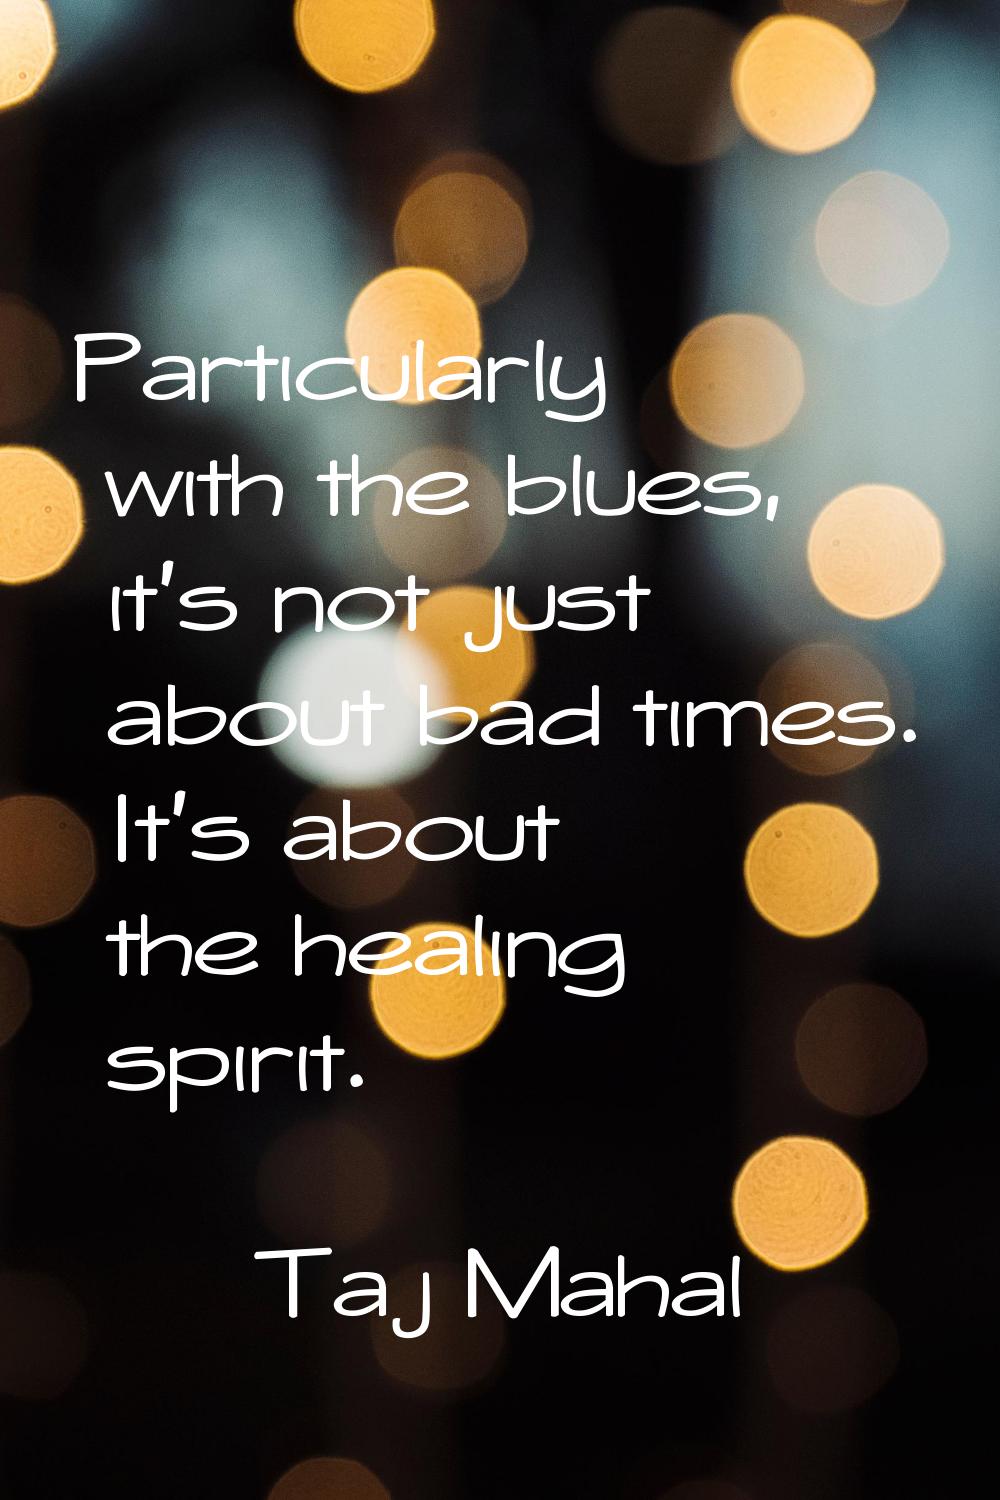 Particularly with the blues, it's not just about bad times. It's about the healing spirit.